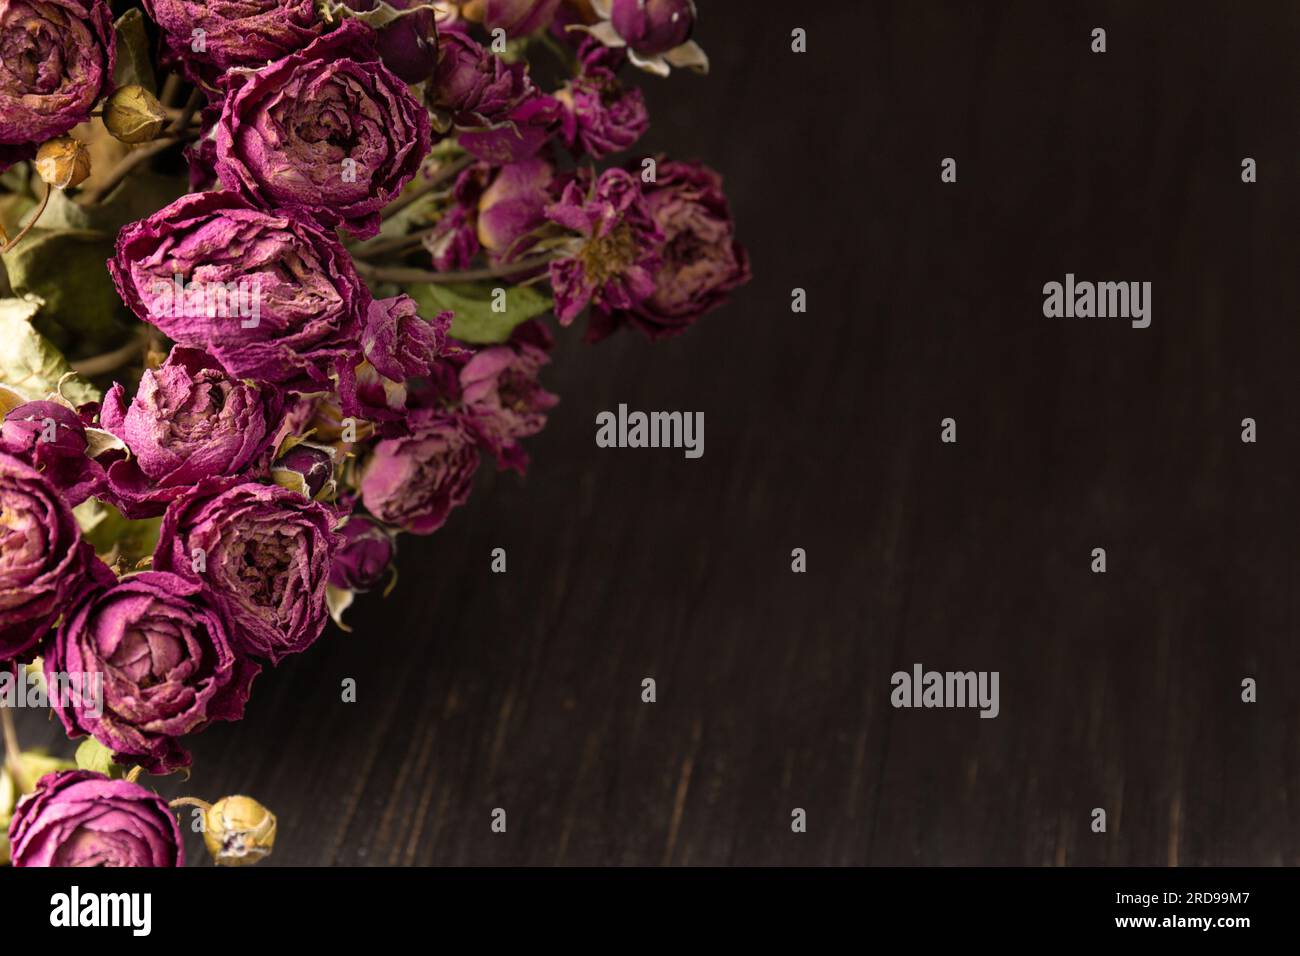 Bouquet of dry pink roses on a dark wooden background close-up. Concept of loneliness or age. Sadness, unhappy love. Stock Photo